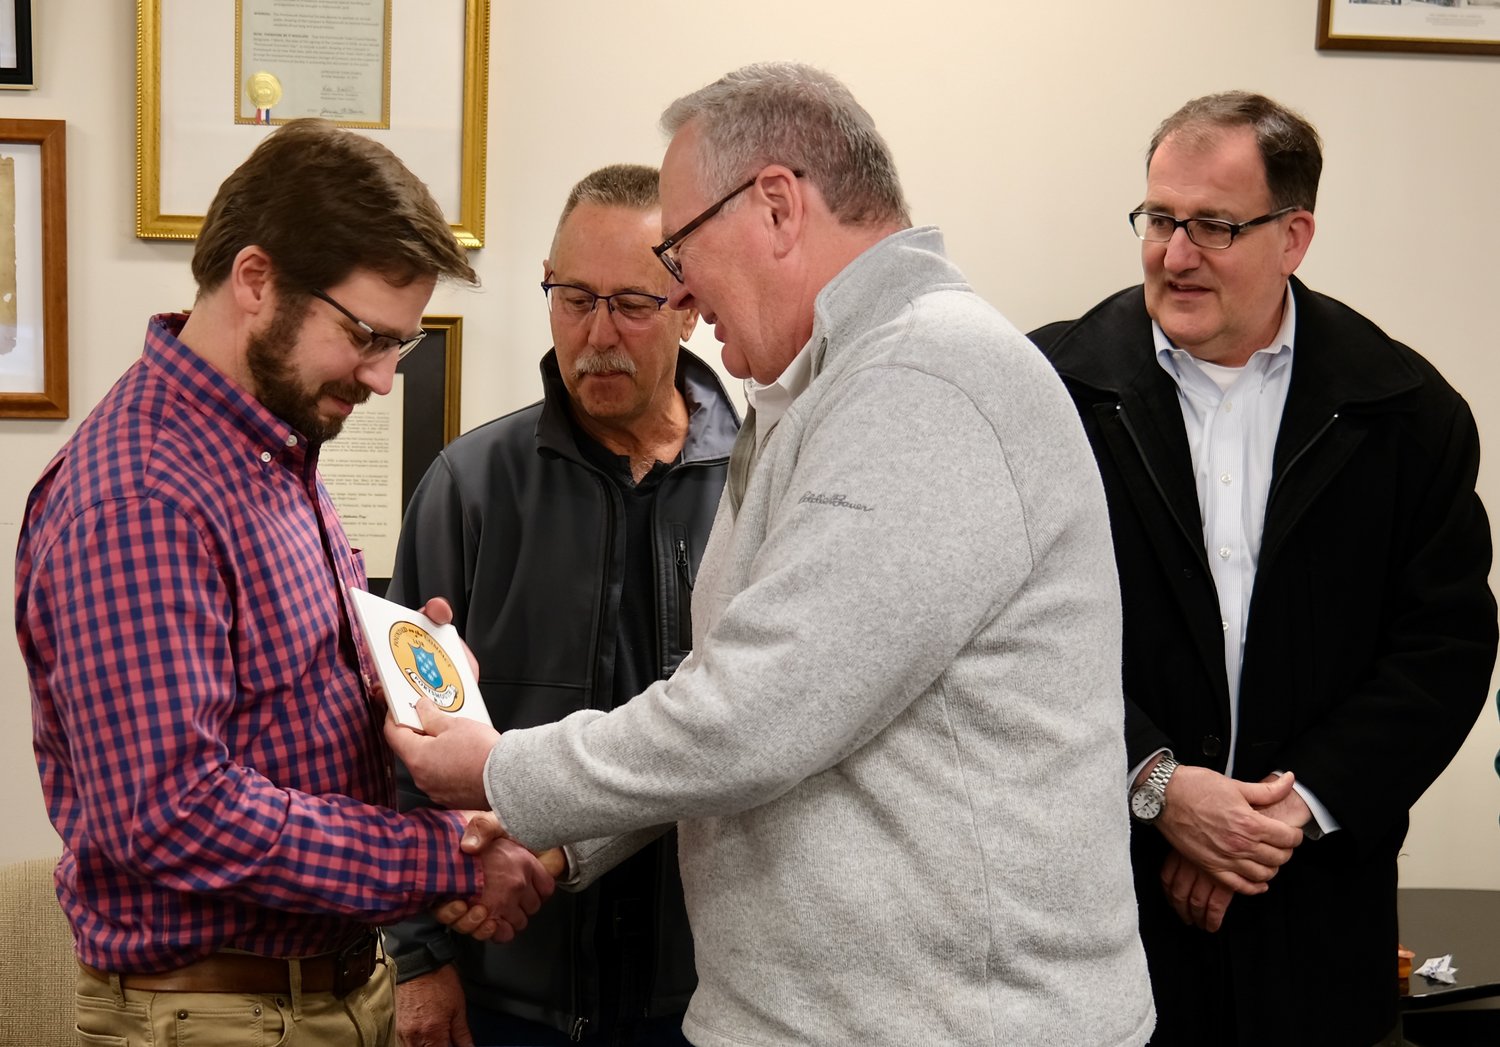 Outgoing Assistant Planner Mike Asciola (left) receives a town tile from Town Administrator Richard Rainer, Jr. during a going-away party in his honor at Town Hall last Thursday. Behind them are Zoning Board of Review Chairman Jim Nott (left) and Planning Board Chairman Edward Lopes, Jr.